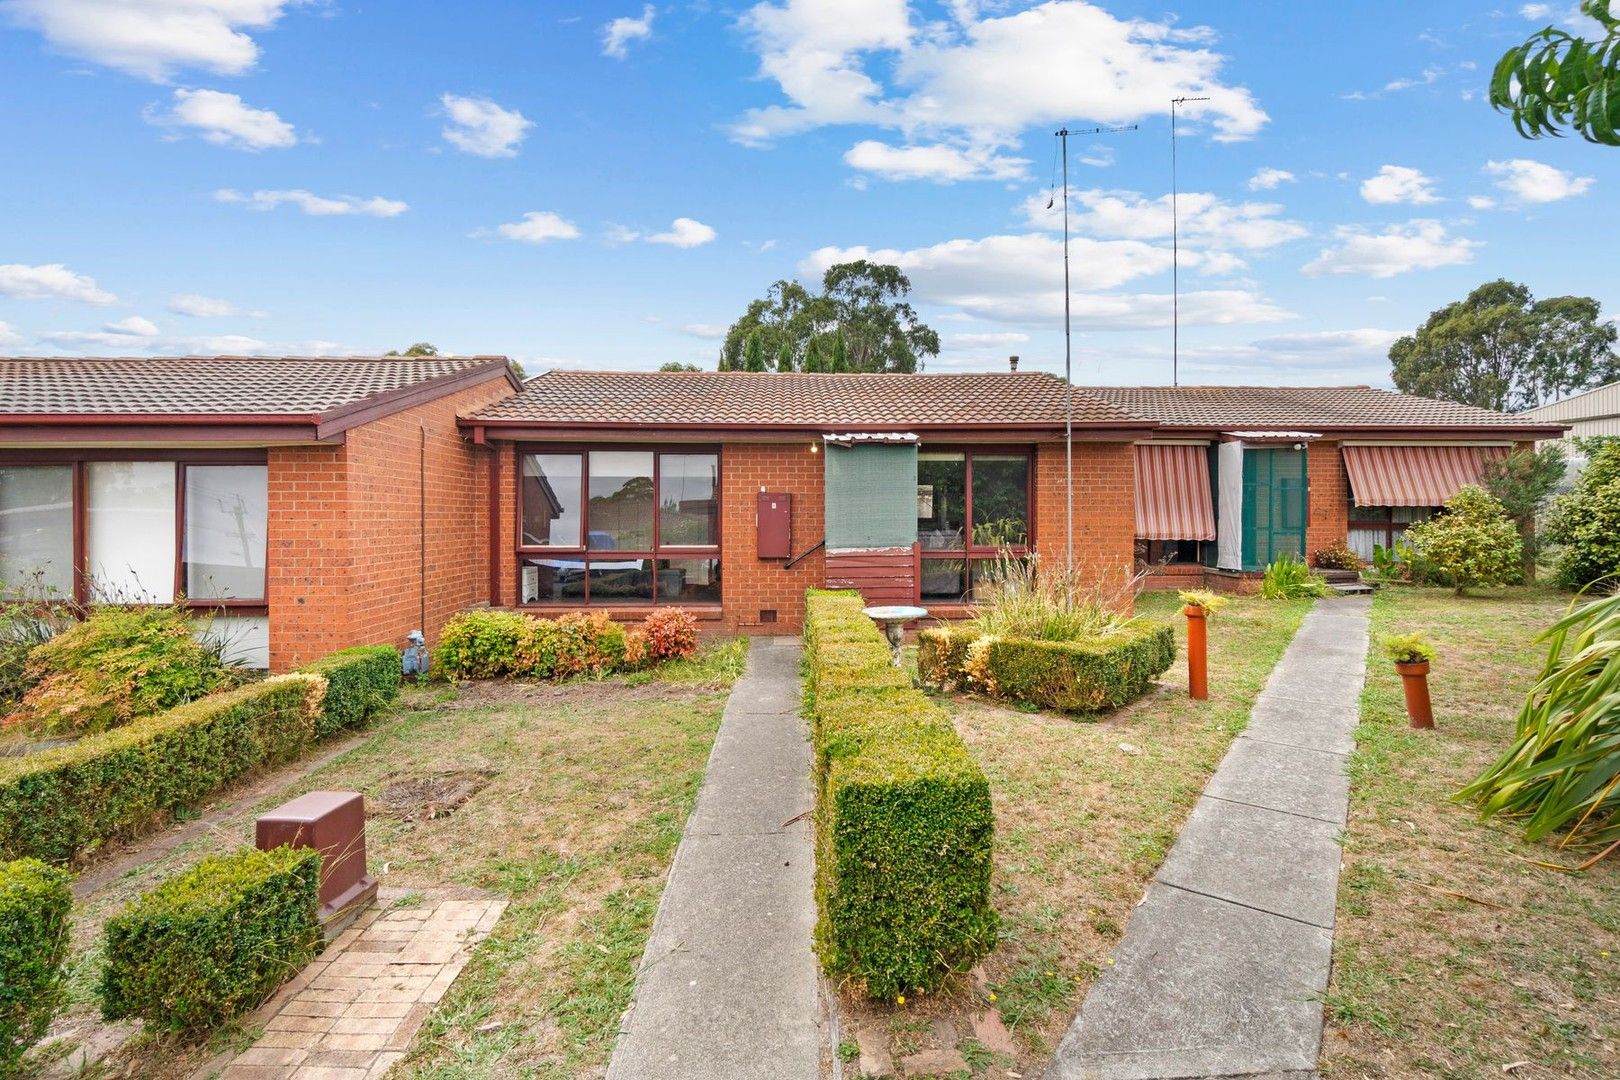 2 bedrooms Apartment / Unit / Flat in 4/29 Strathcole Drive TRARALGON VIC, 3844